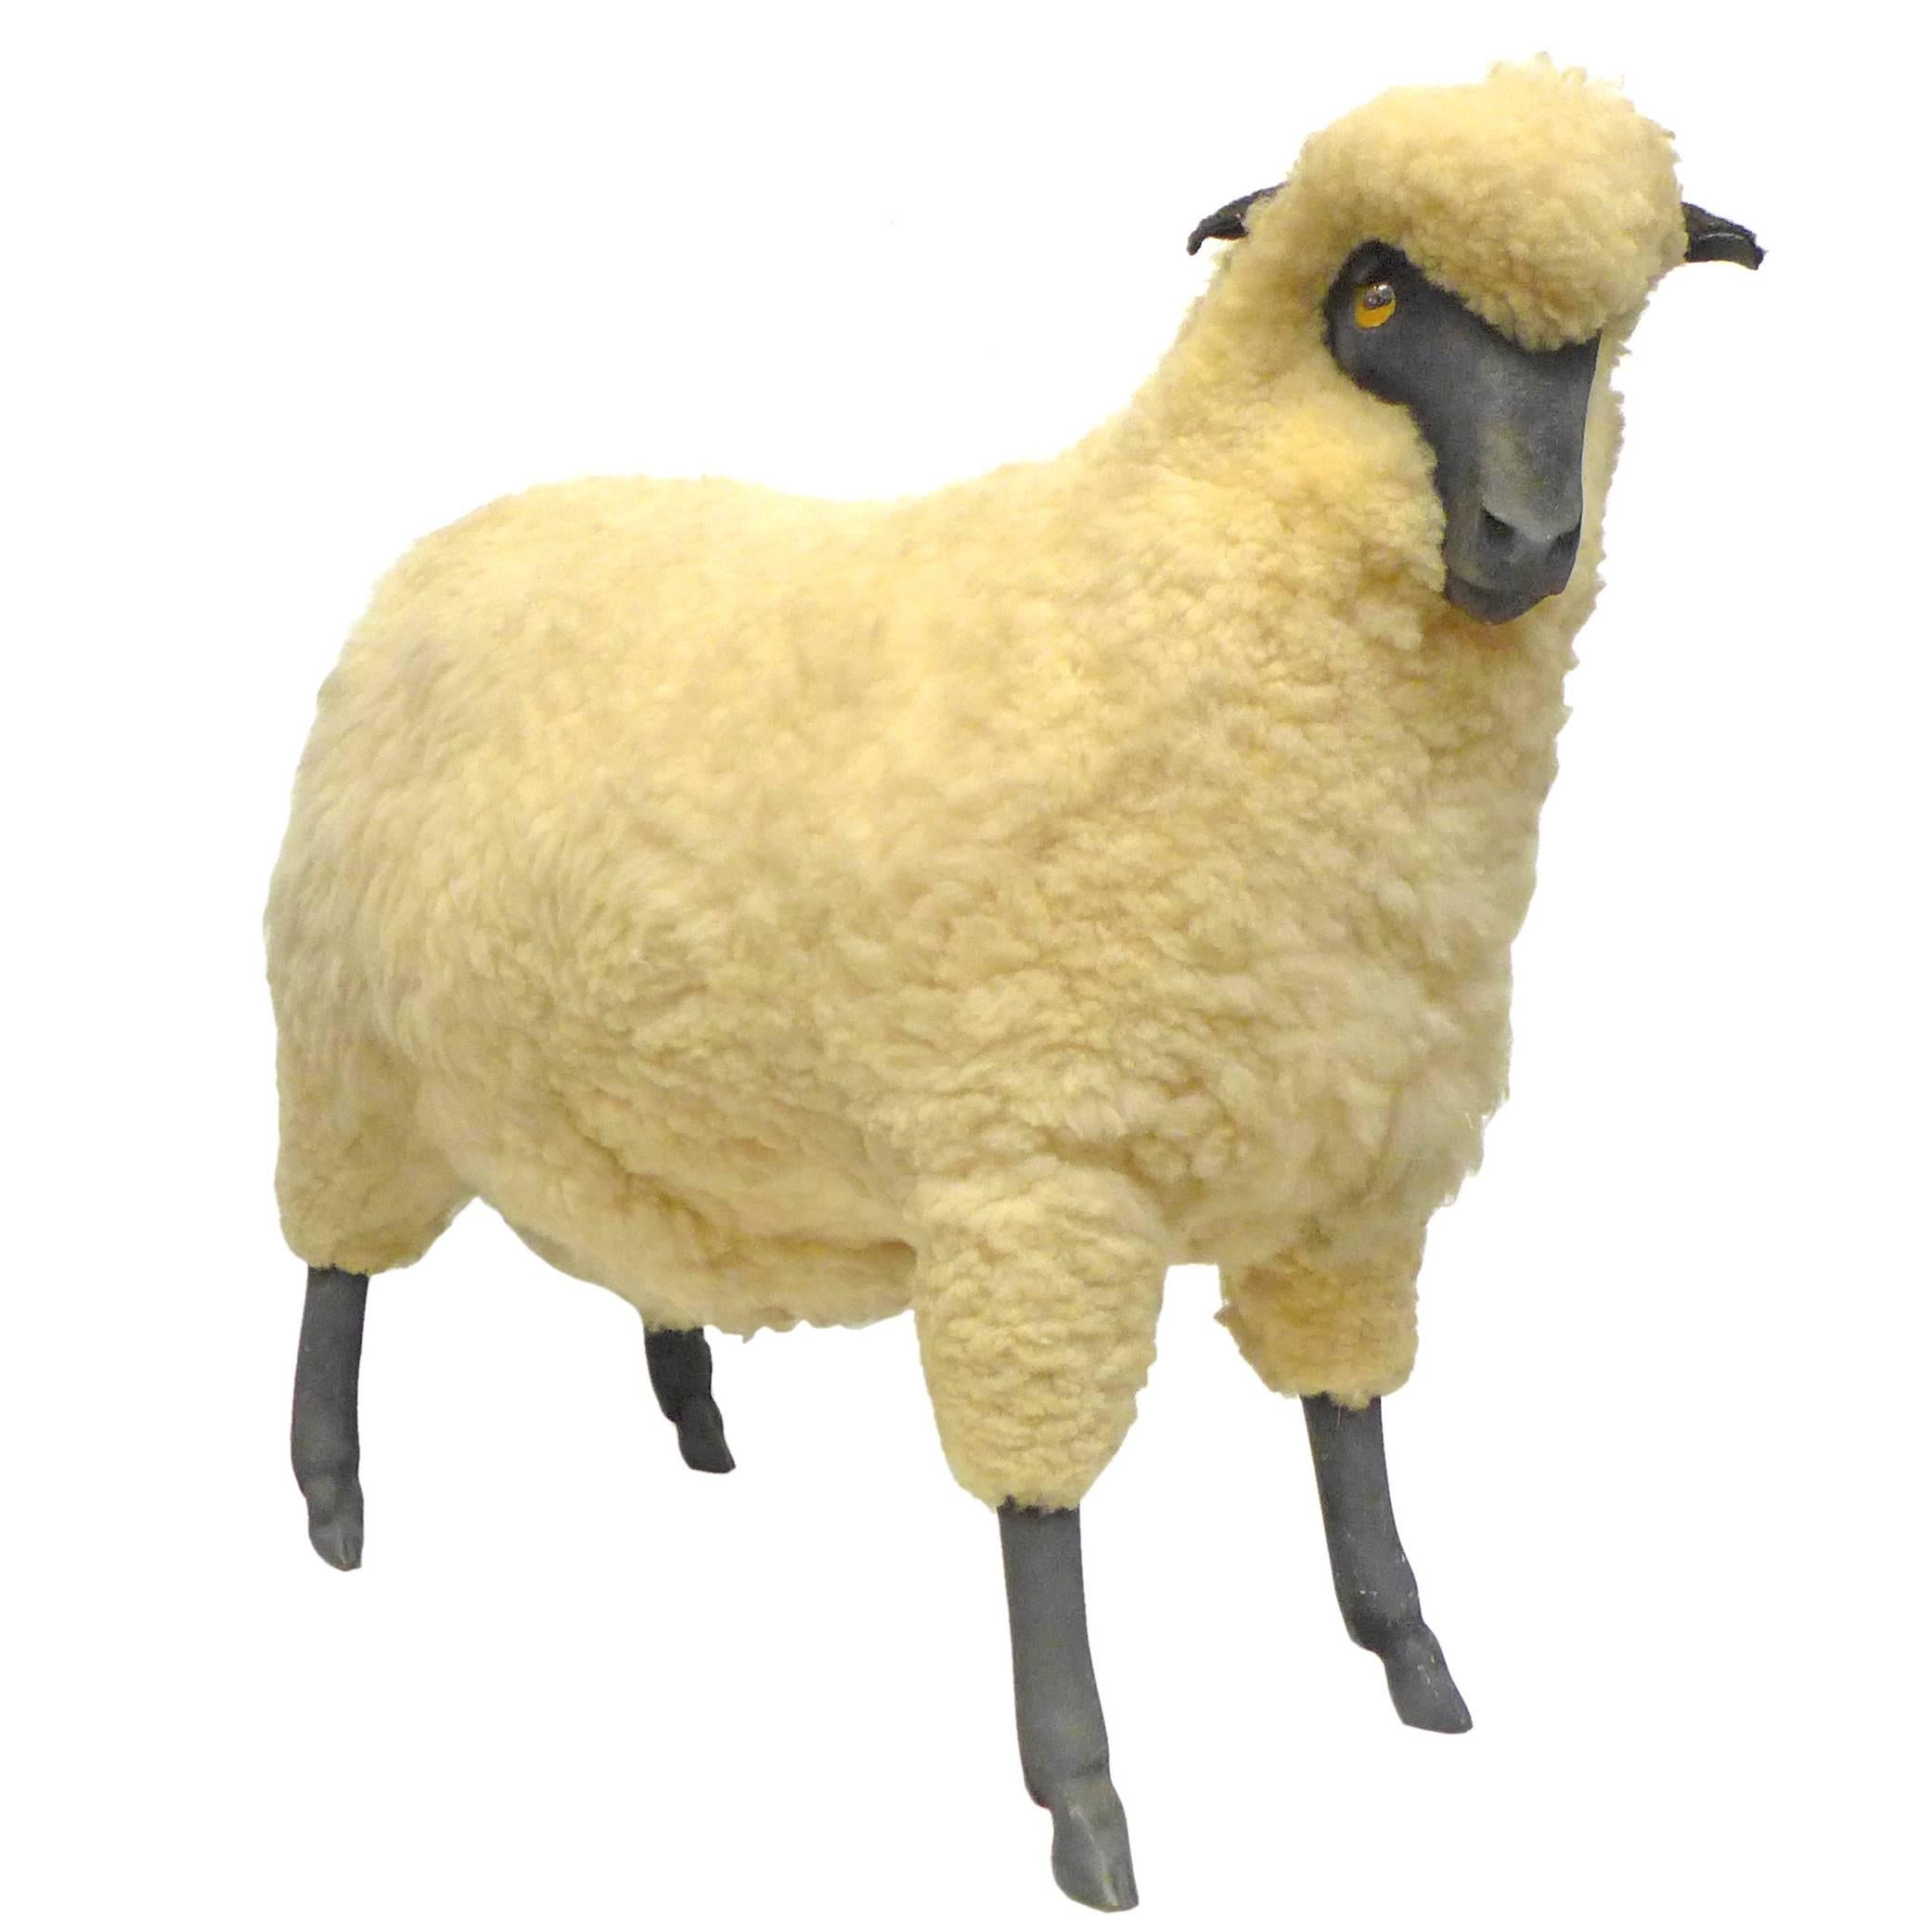 Vintage Wool and Resin Sheep in the Style of Lalanne